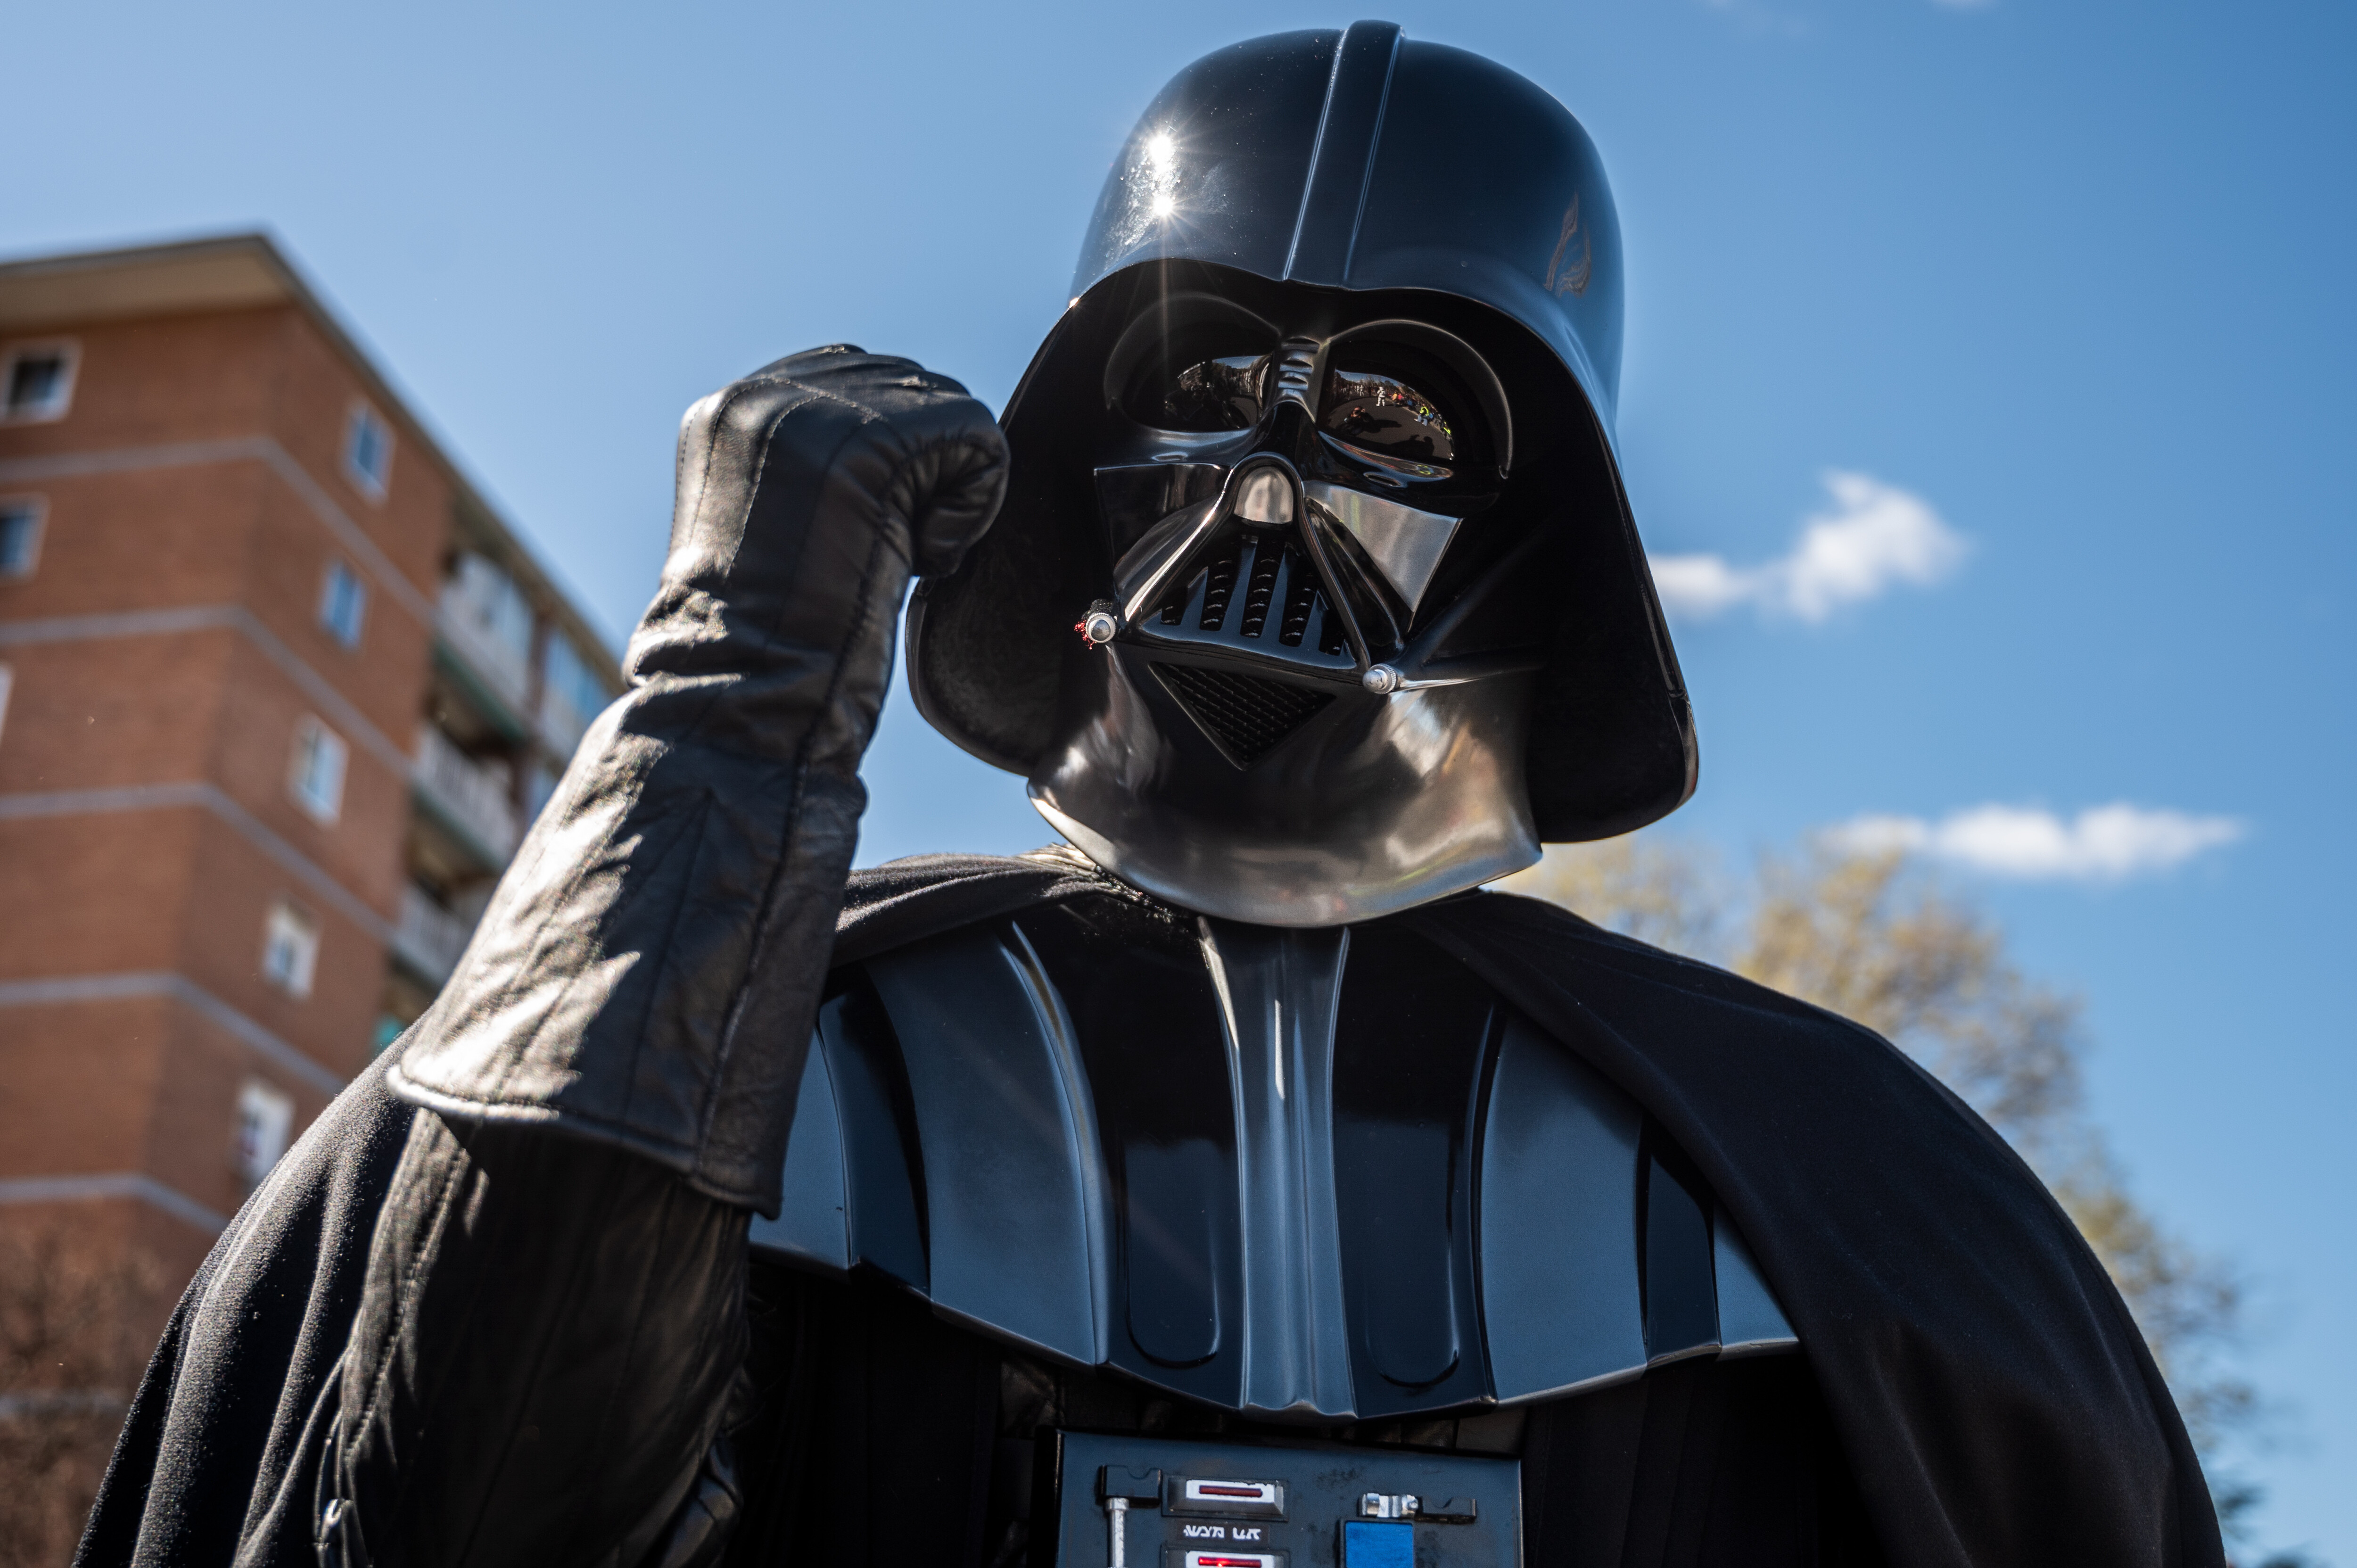 A man dressed as Darth Vader is seen marching during a Star Wars Parade in the Aluche neighborhood of Madrid. Nearly 300 people have paraded through the streets dressed with costumes as characters from the Star Wars saga.